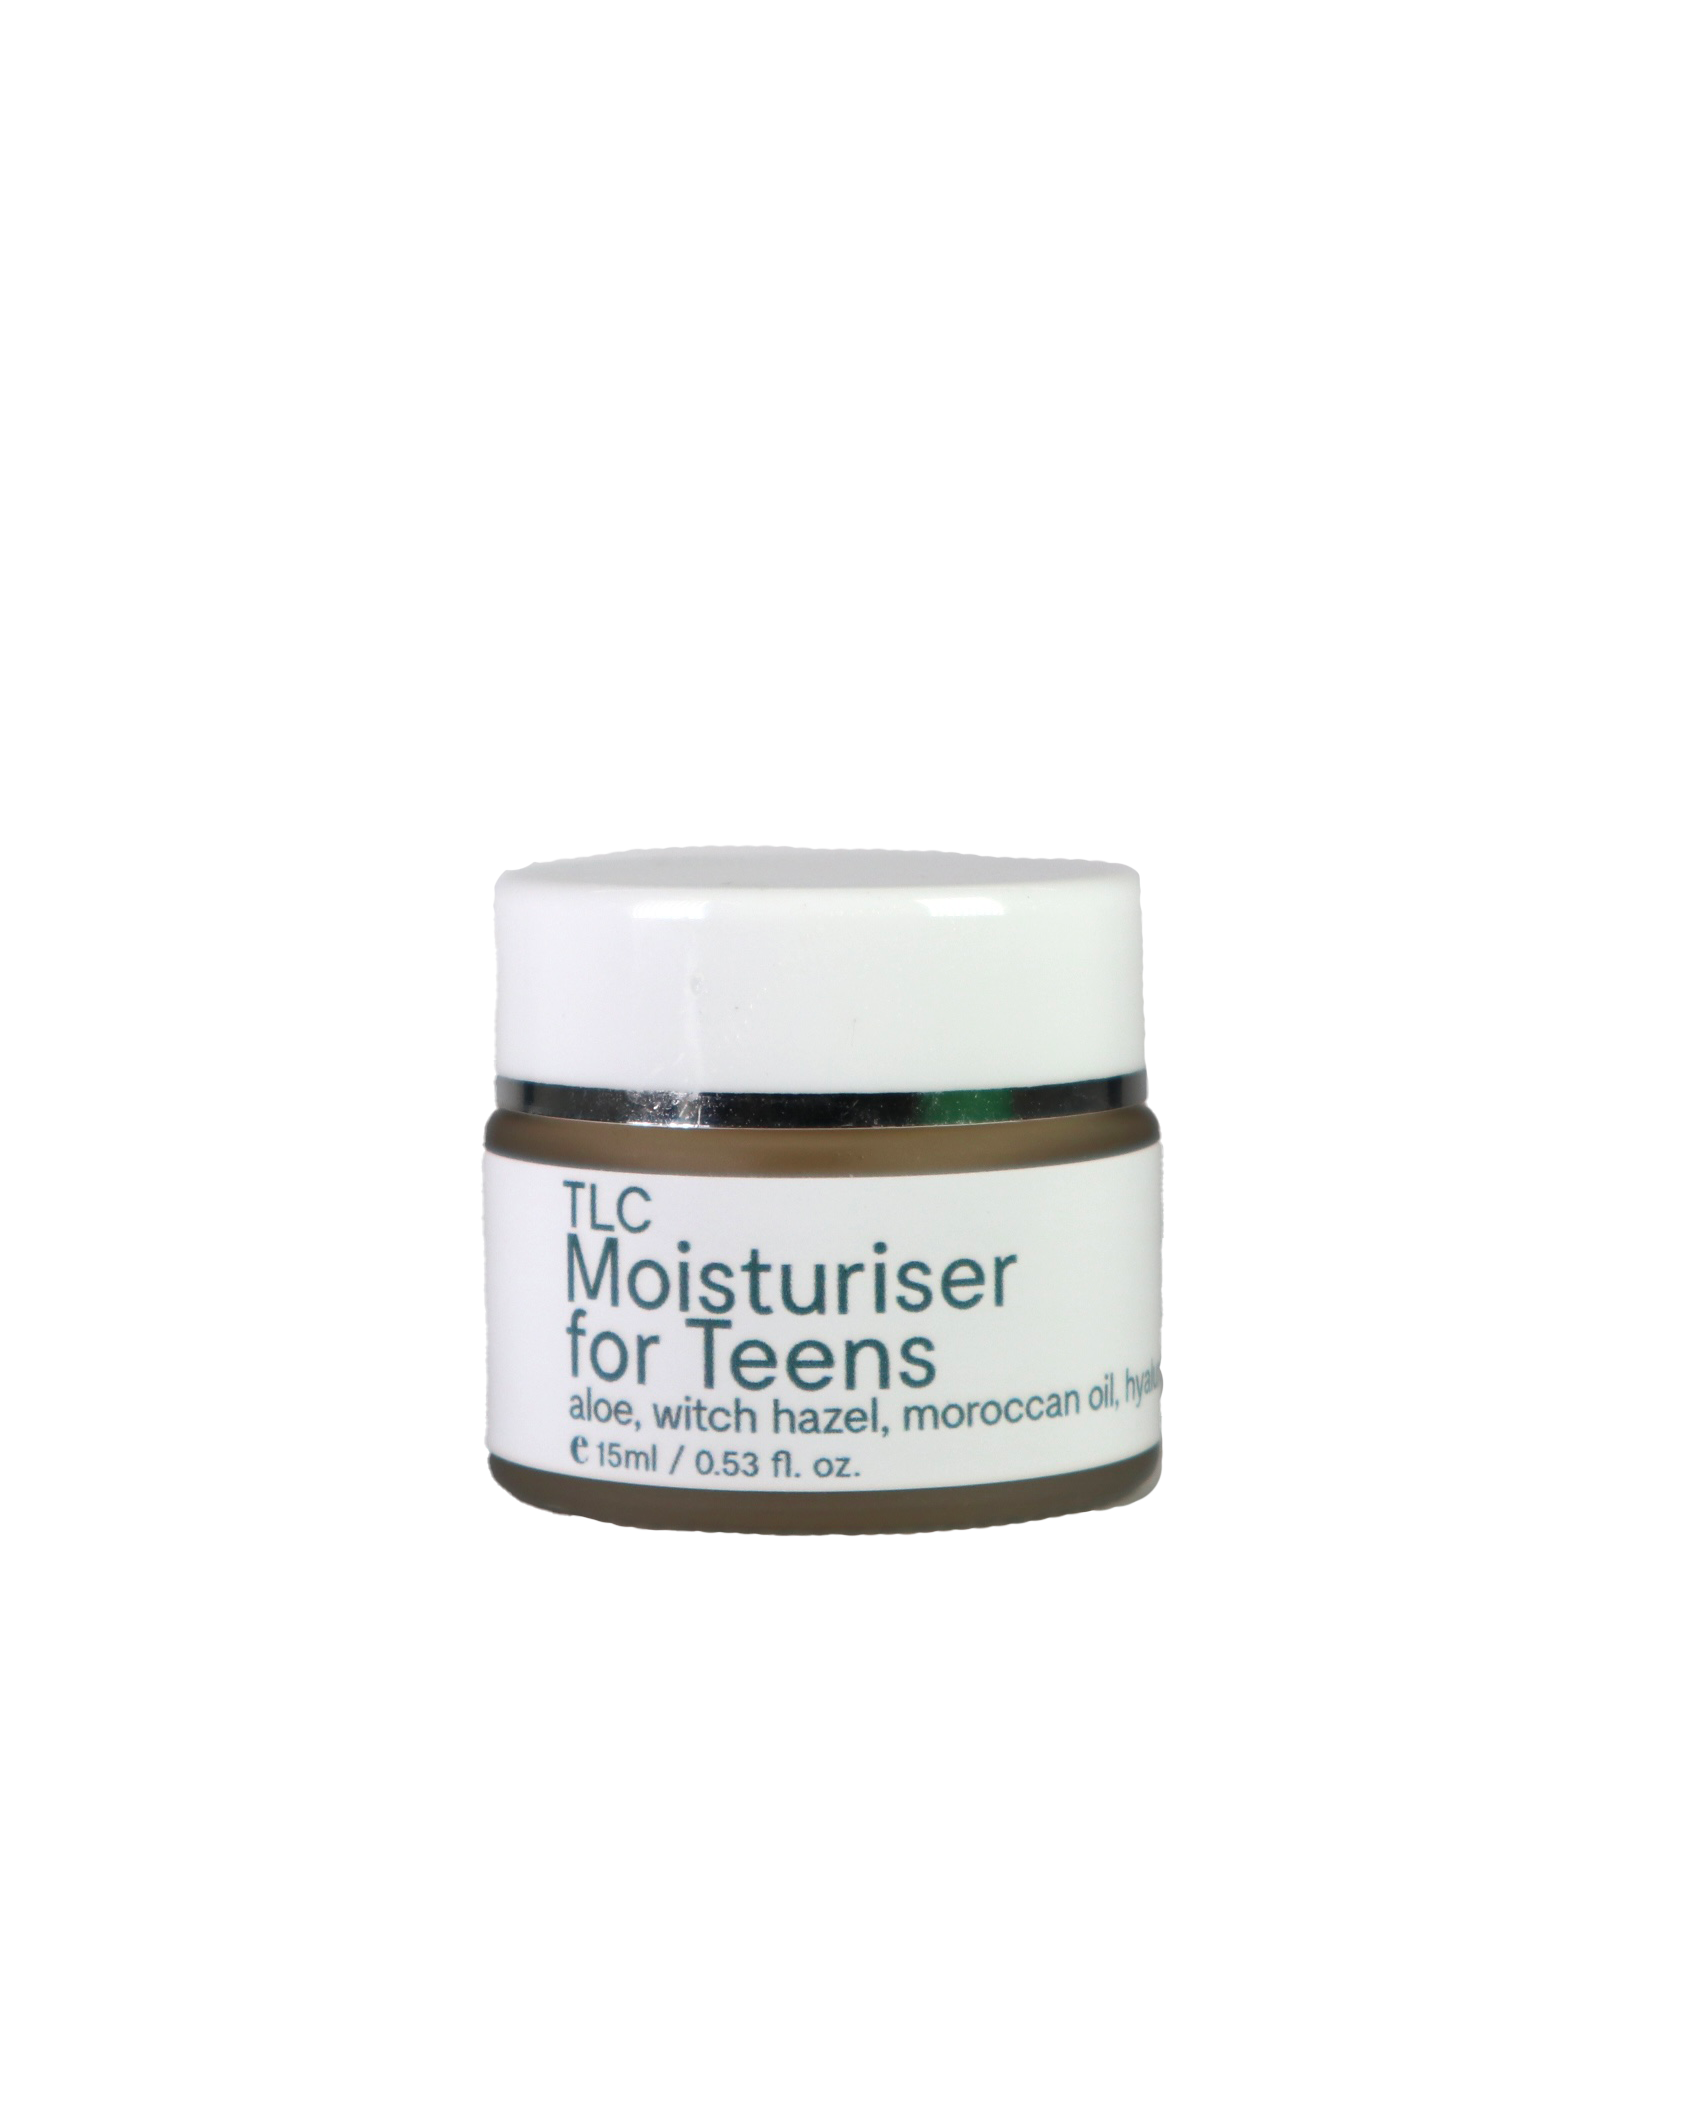 Azurlis™ TLC Moisturiser for Teens 50/30ml is for acne prone skin. Formulated to nourish and balance teenage skin, helping to regulate sebaceous gland activity and control bacterial flora. SPF8.